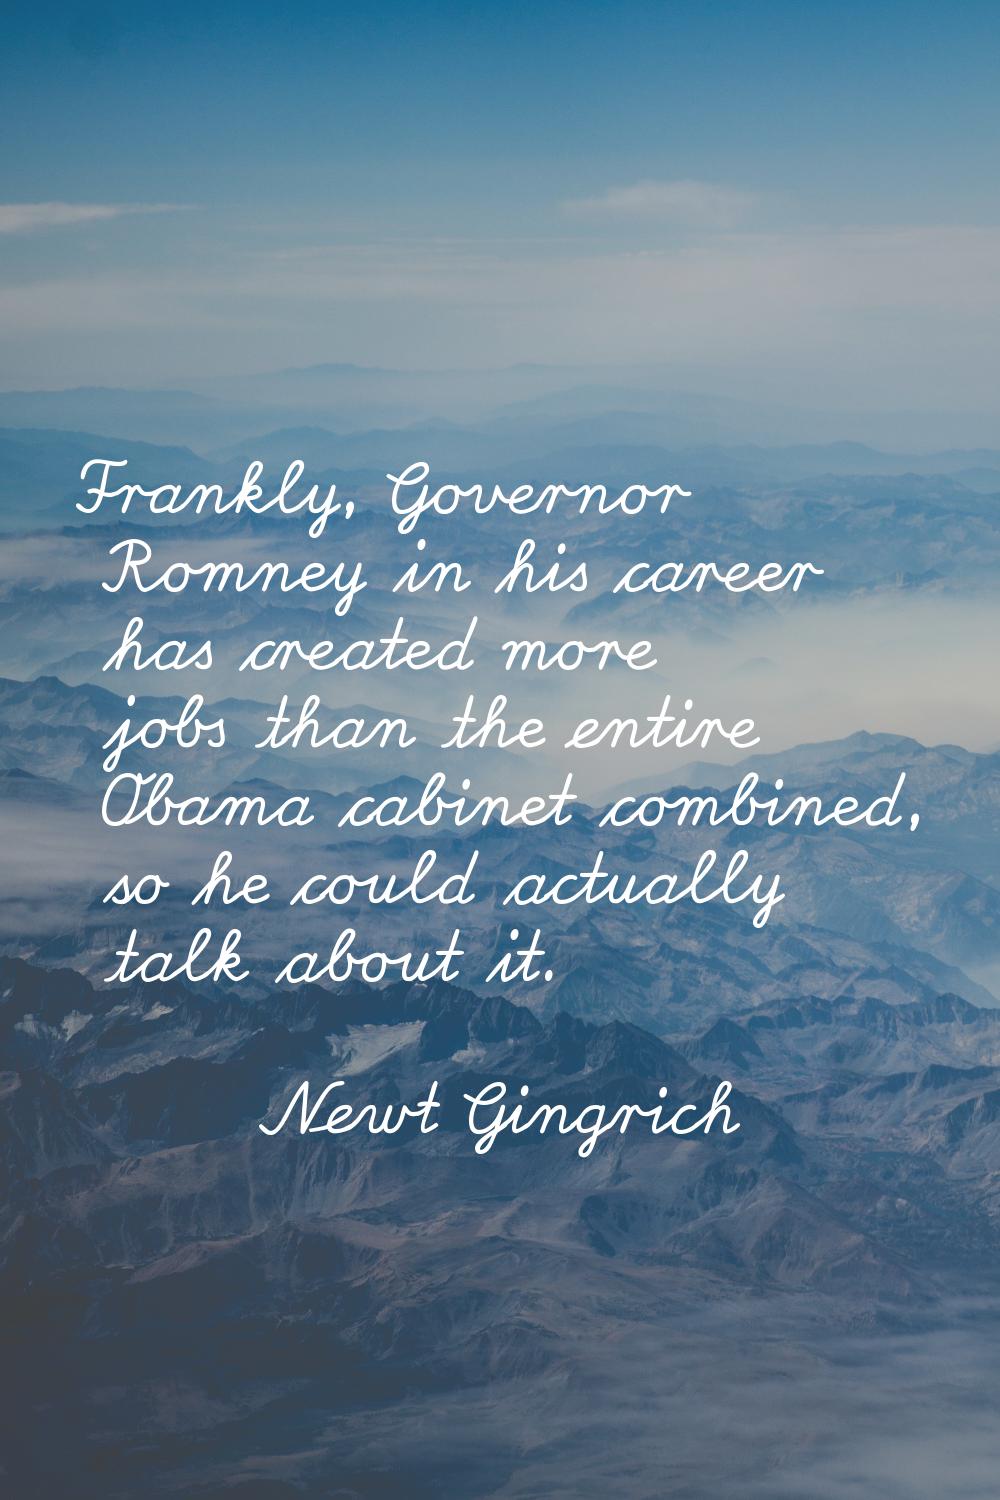 Frankly, Governor Romney in his career has created more jobs than the entire Obama cabinet combined